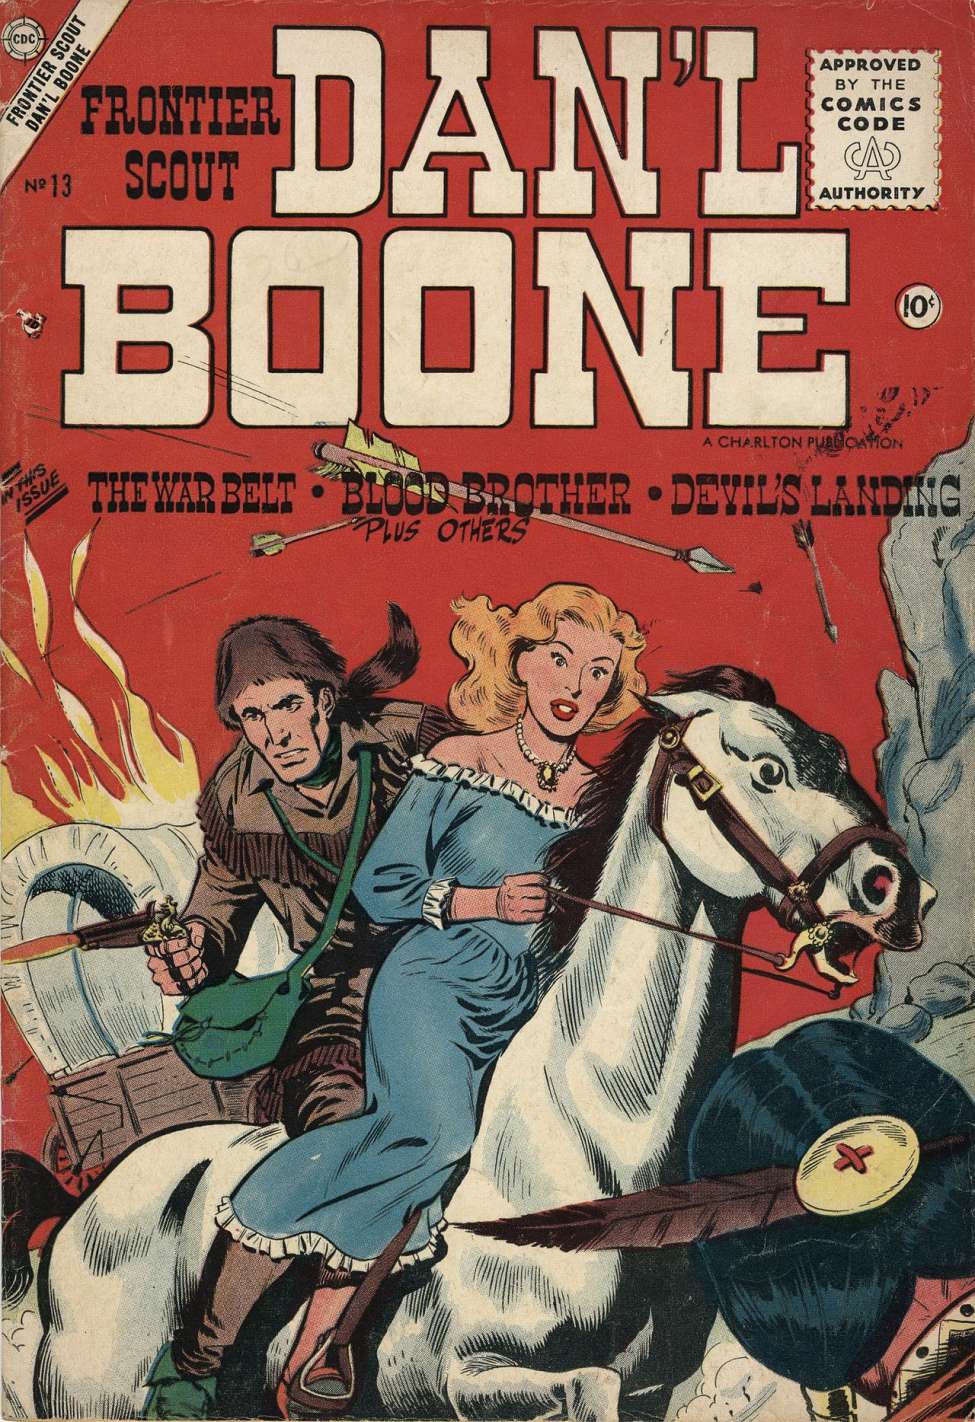 Comic Book Cover For Frontier Scout, Dan'l Boone 13